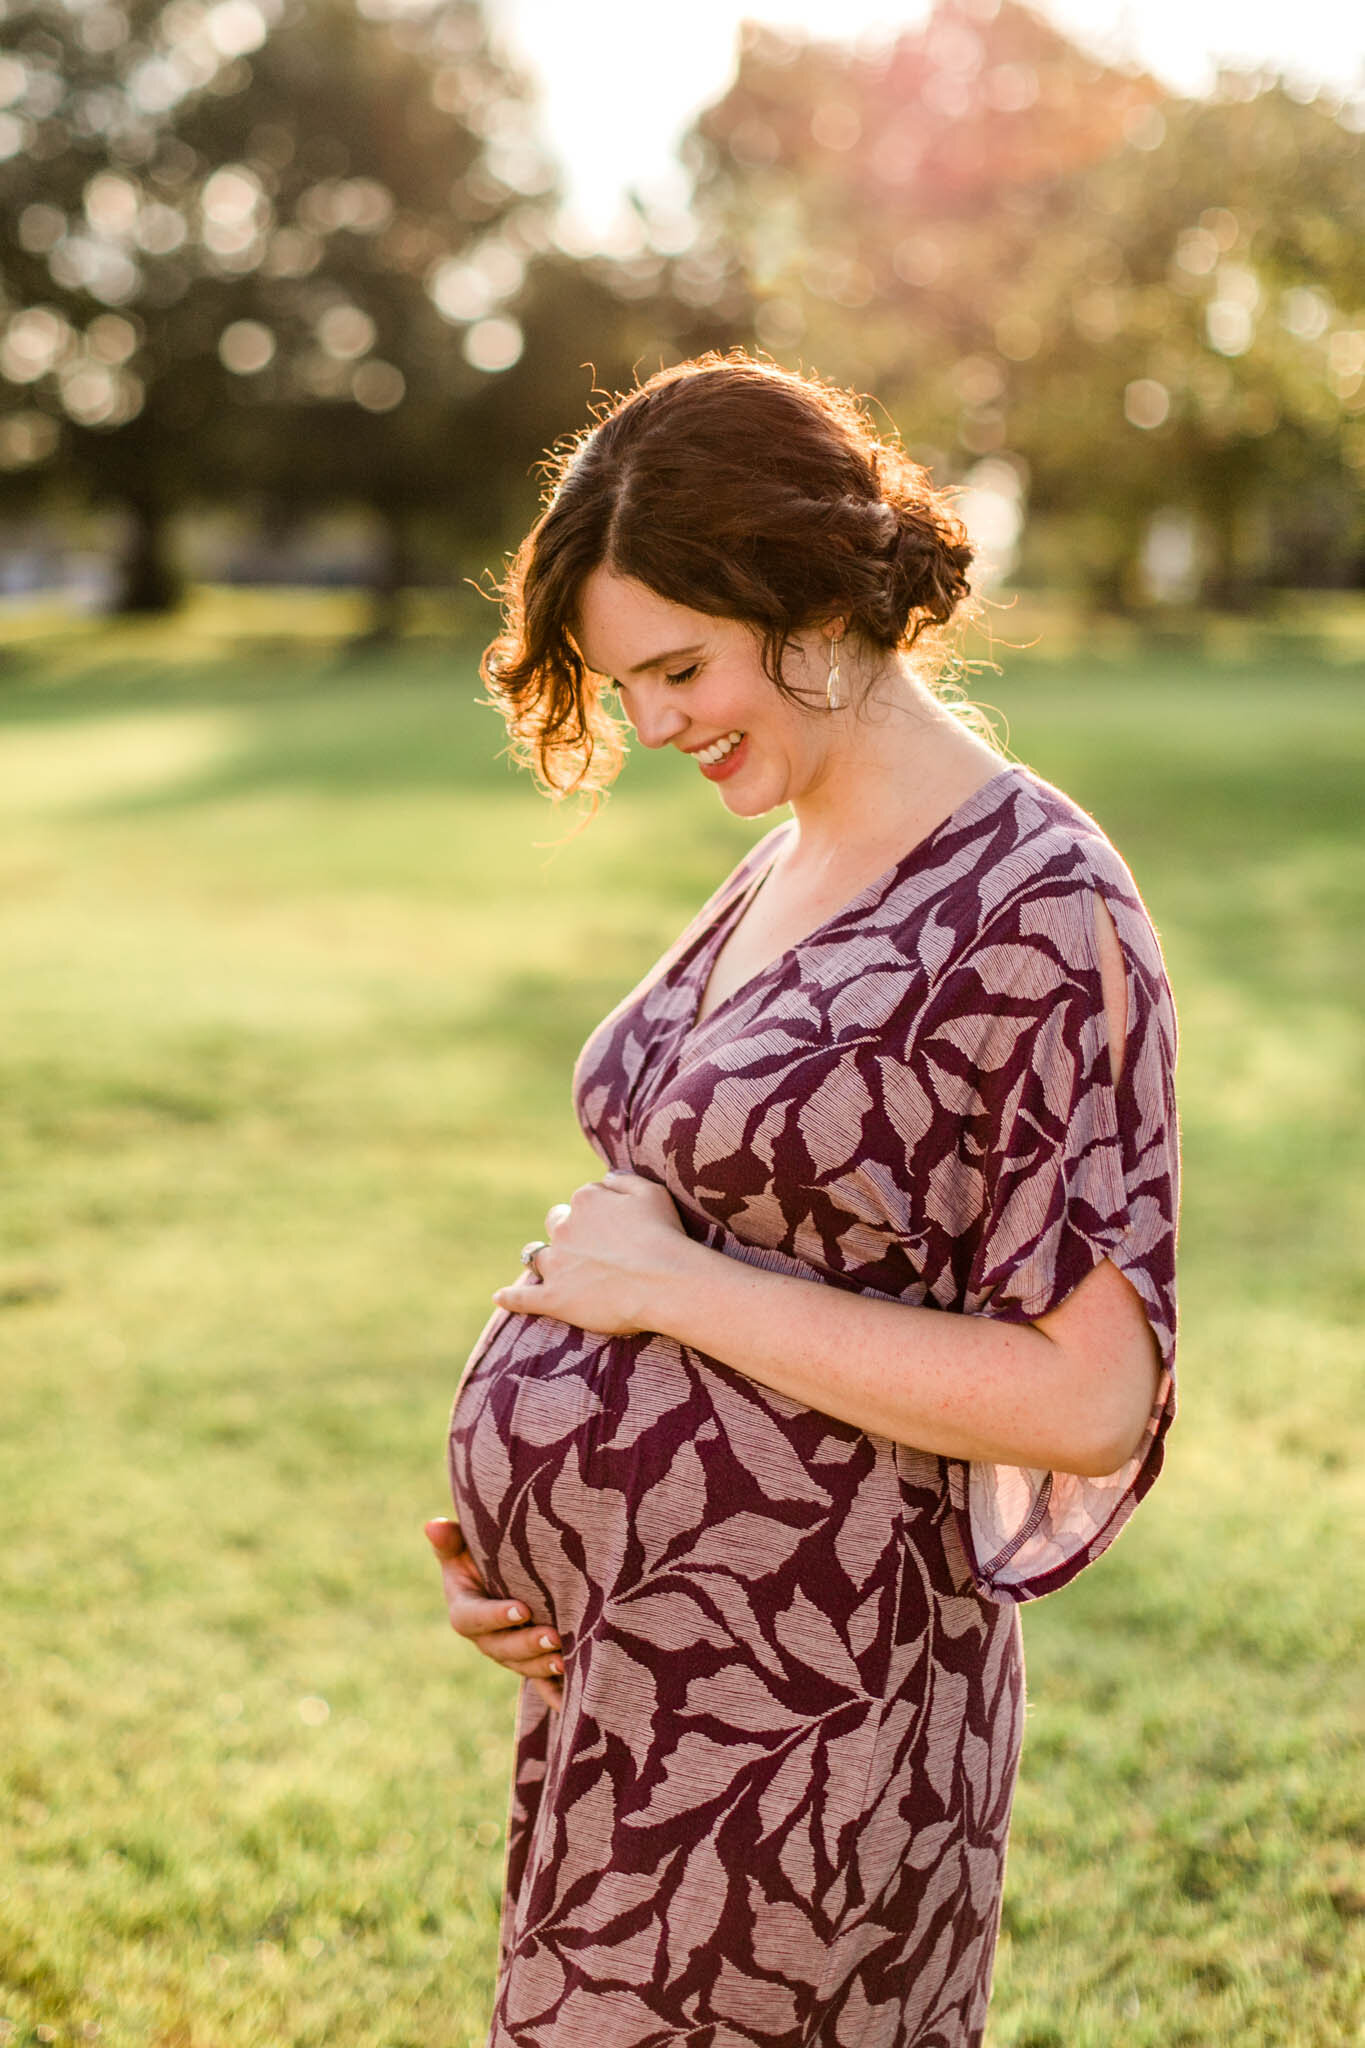 Raleigh Maternity Photography at Dix Park | By G. Lin Photography | Woman smiling and holding hands on baby bump